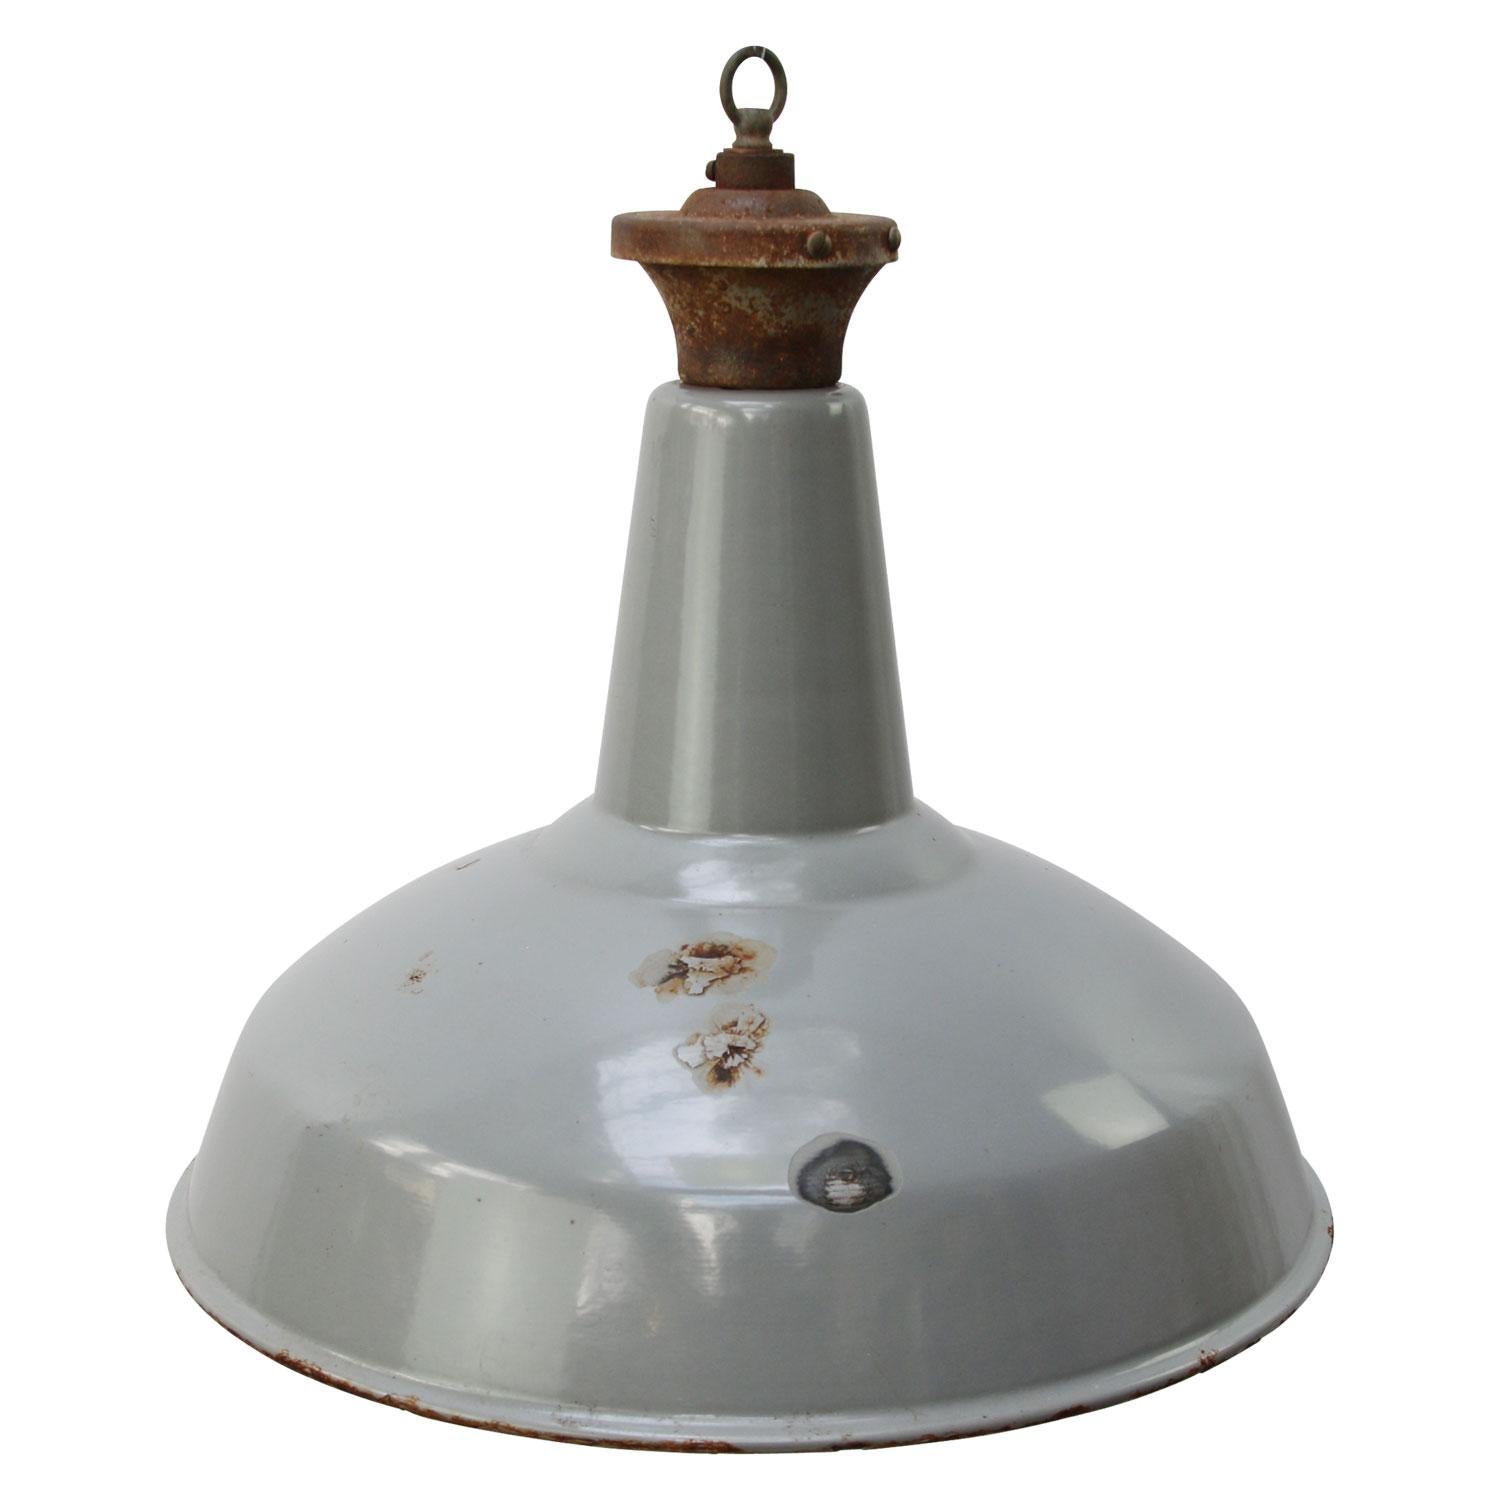 English Industrial vintage pendant
grey enamel with white inside

Weight: 3.50 kg / 7.7 lb

Priced per individual item. All lamps have been made suitable by international standards for incandescent light bulbs, energy-efficient and LED bulbs.